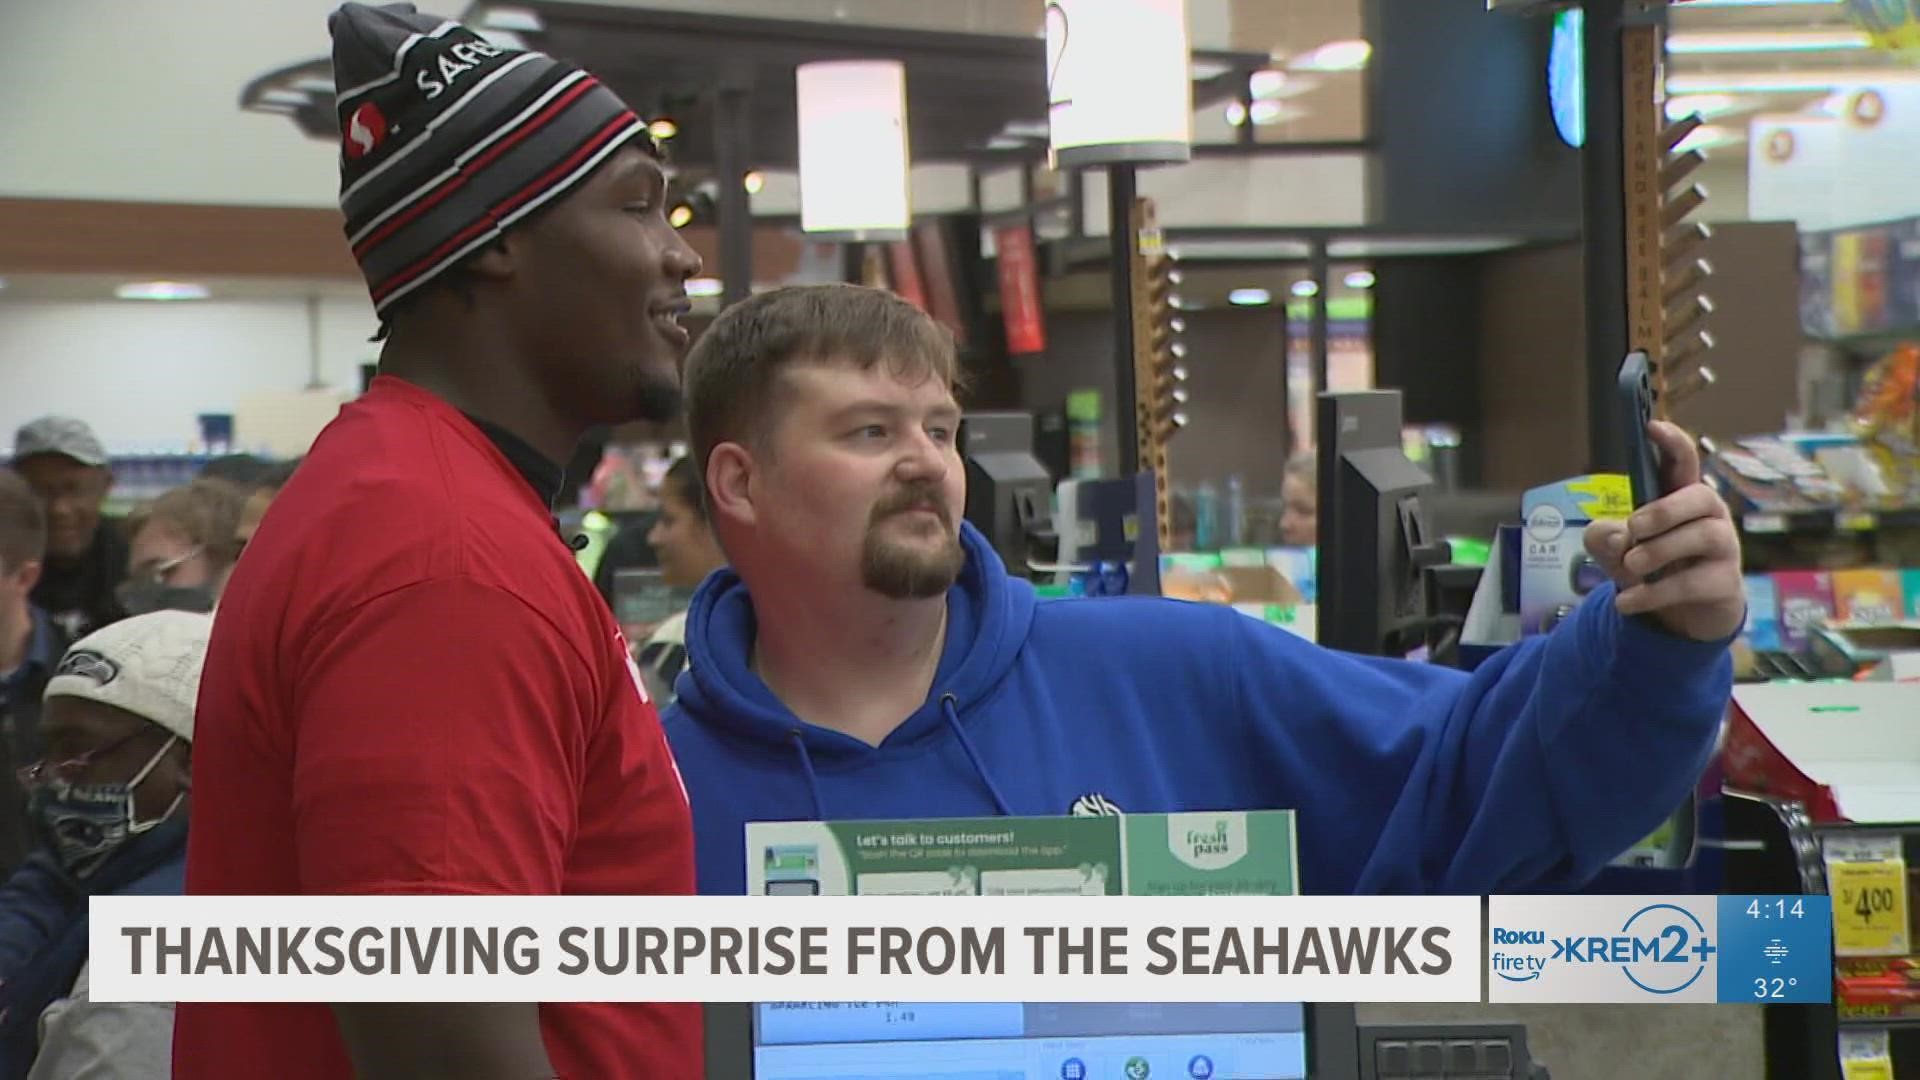 The Seahawks surprised every single customer for one hour. They signed autographs on the receipts.